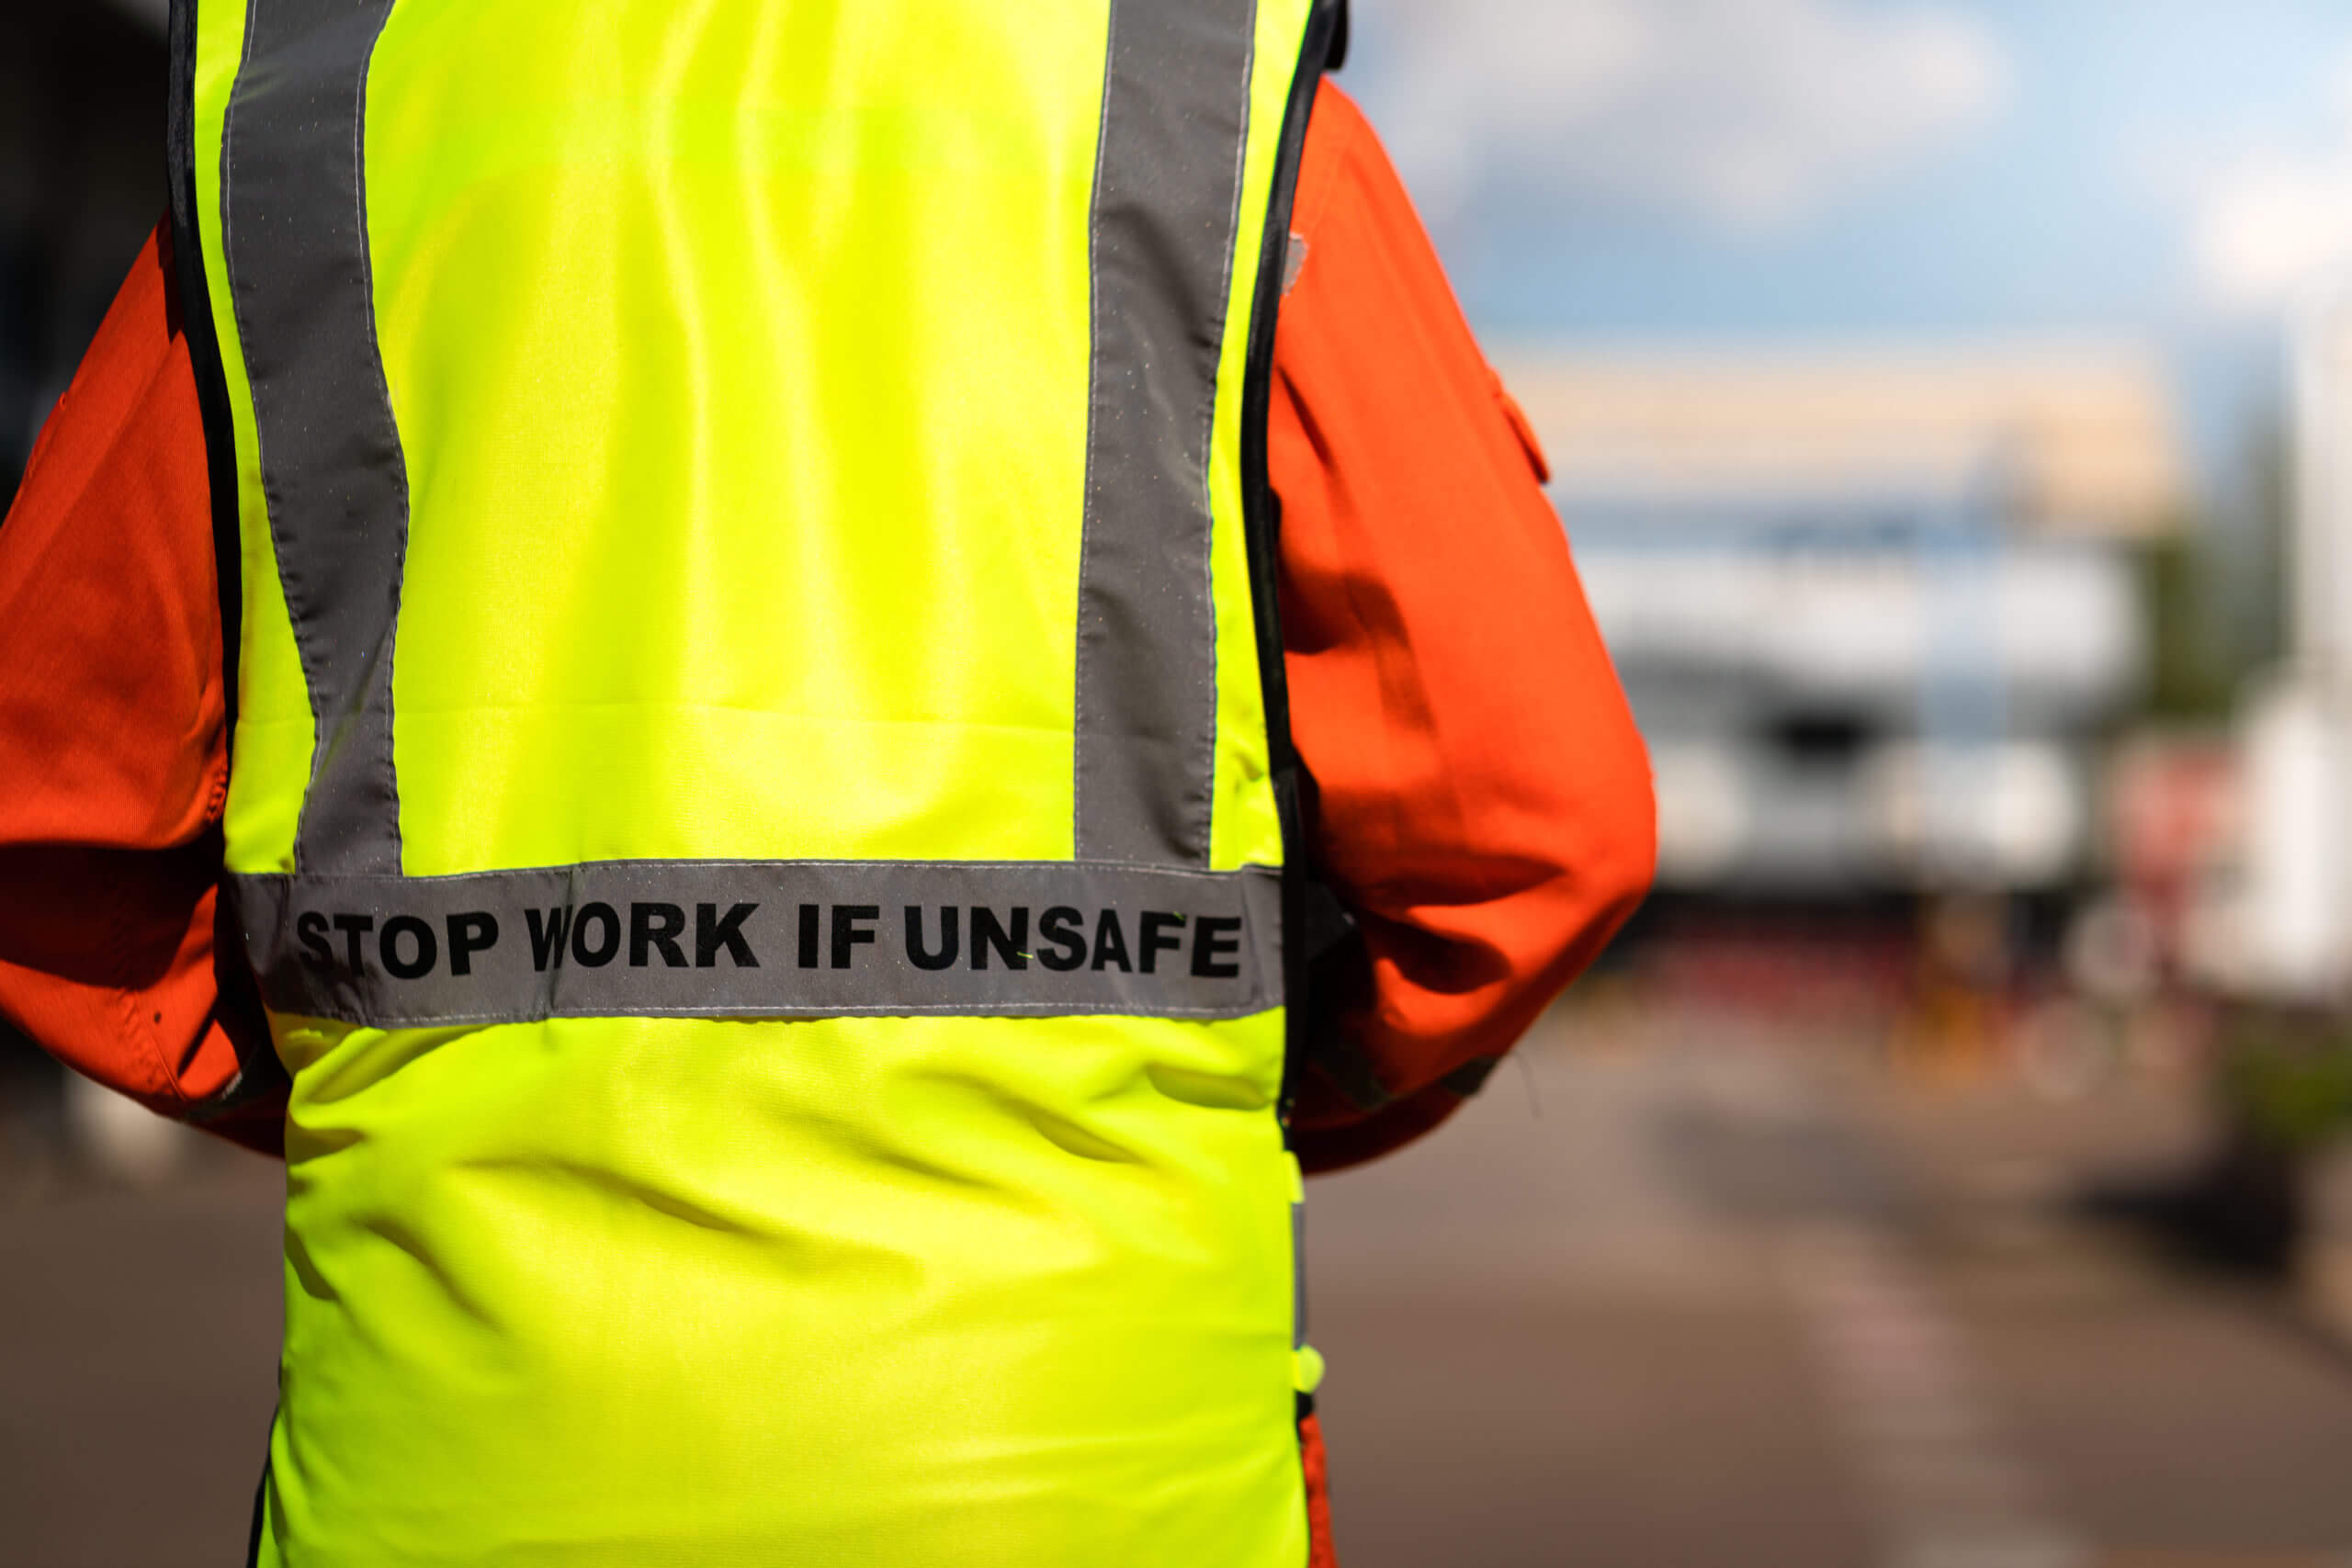 "Stop work if unsafe" on lifting reflective vest.